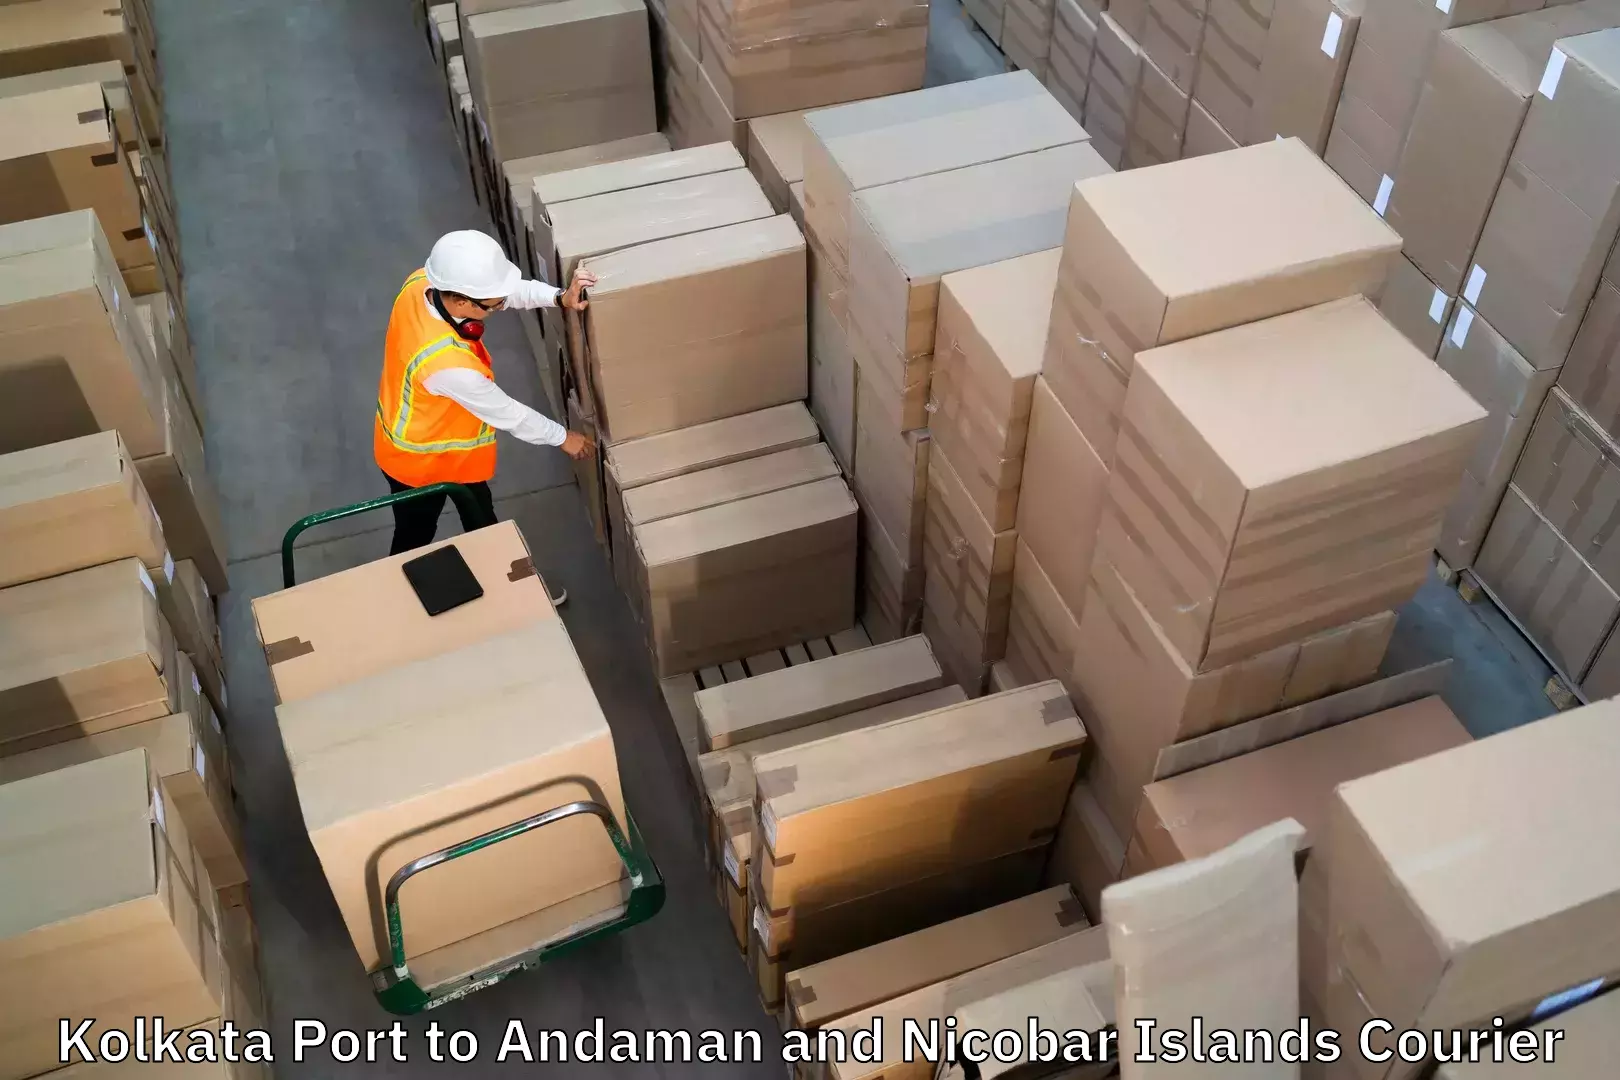 Luggage transport solutions Kolkata Port to North And Middle Andaman